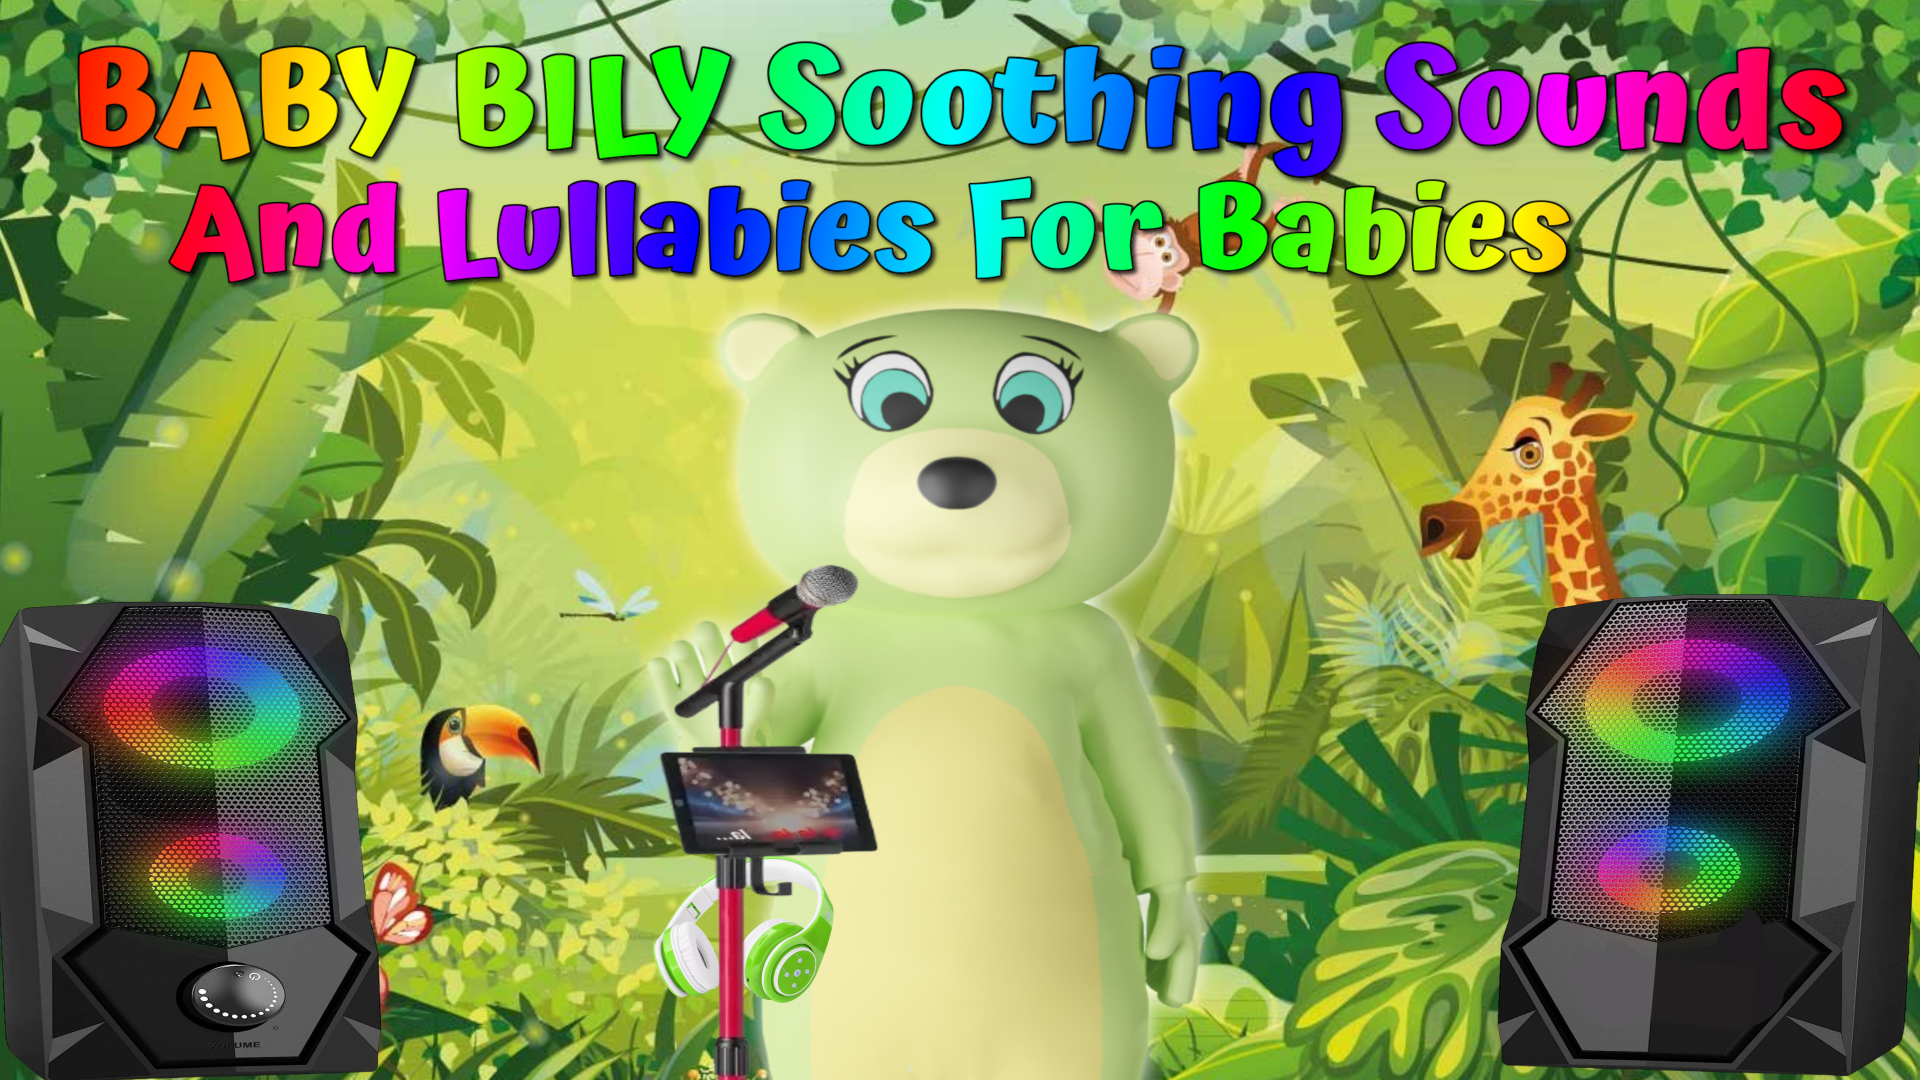 BABY BILY Soothing Sounds Lullabies For Babies (1)